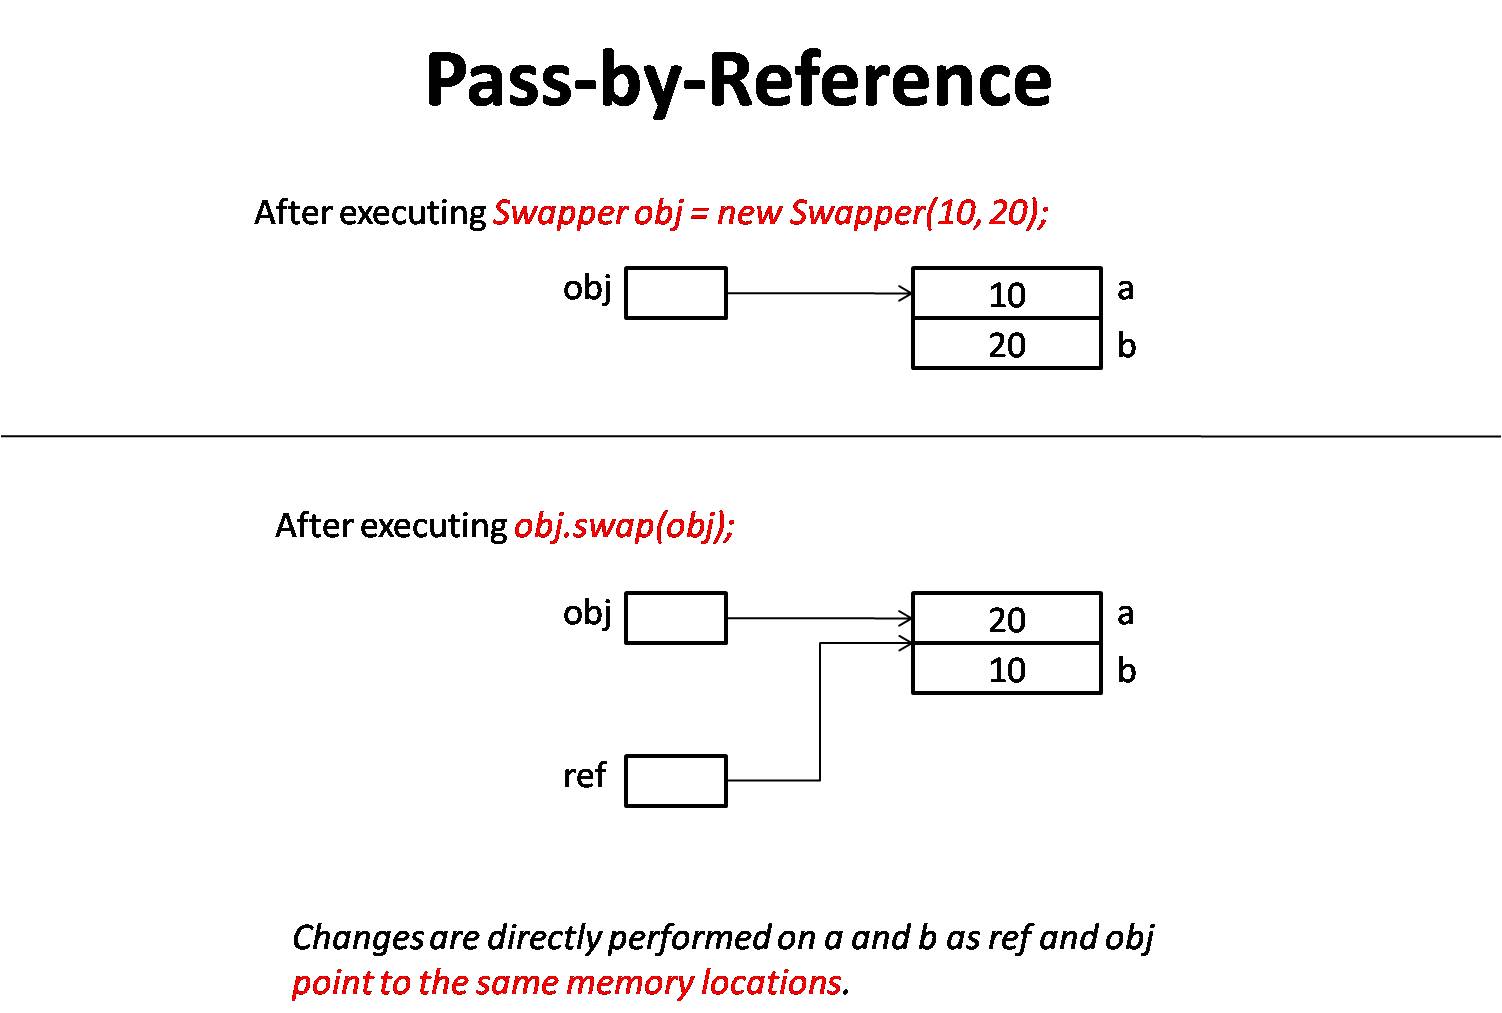 Pass by reference paramter passing technique